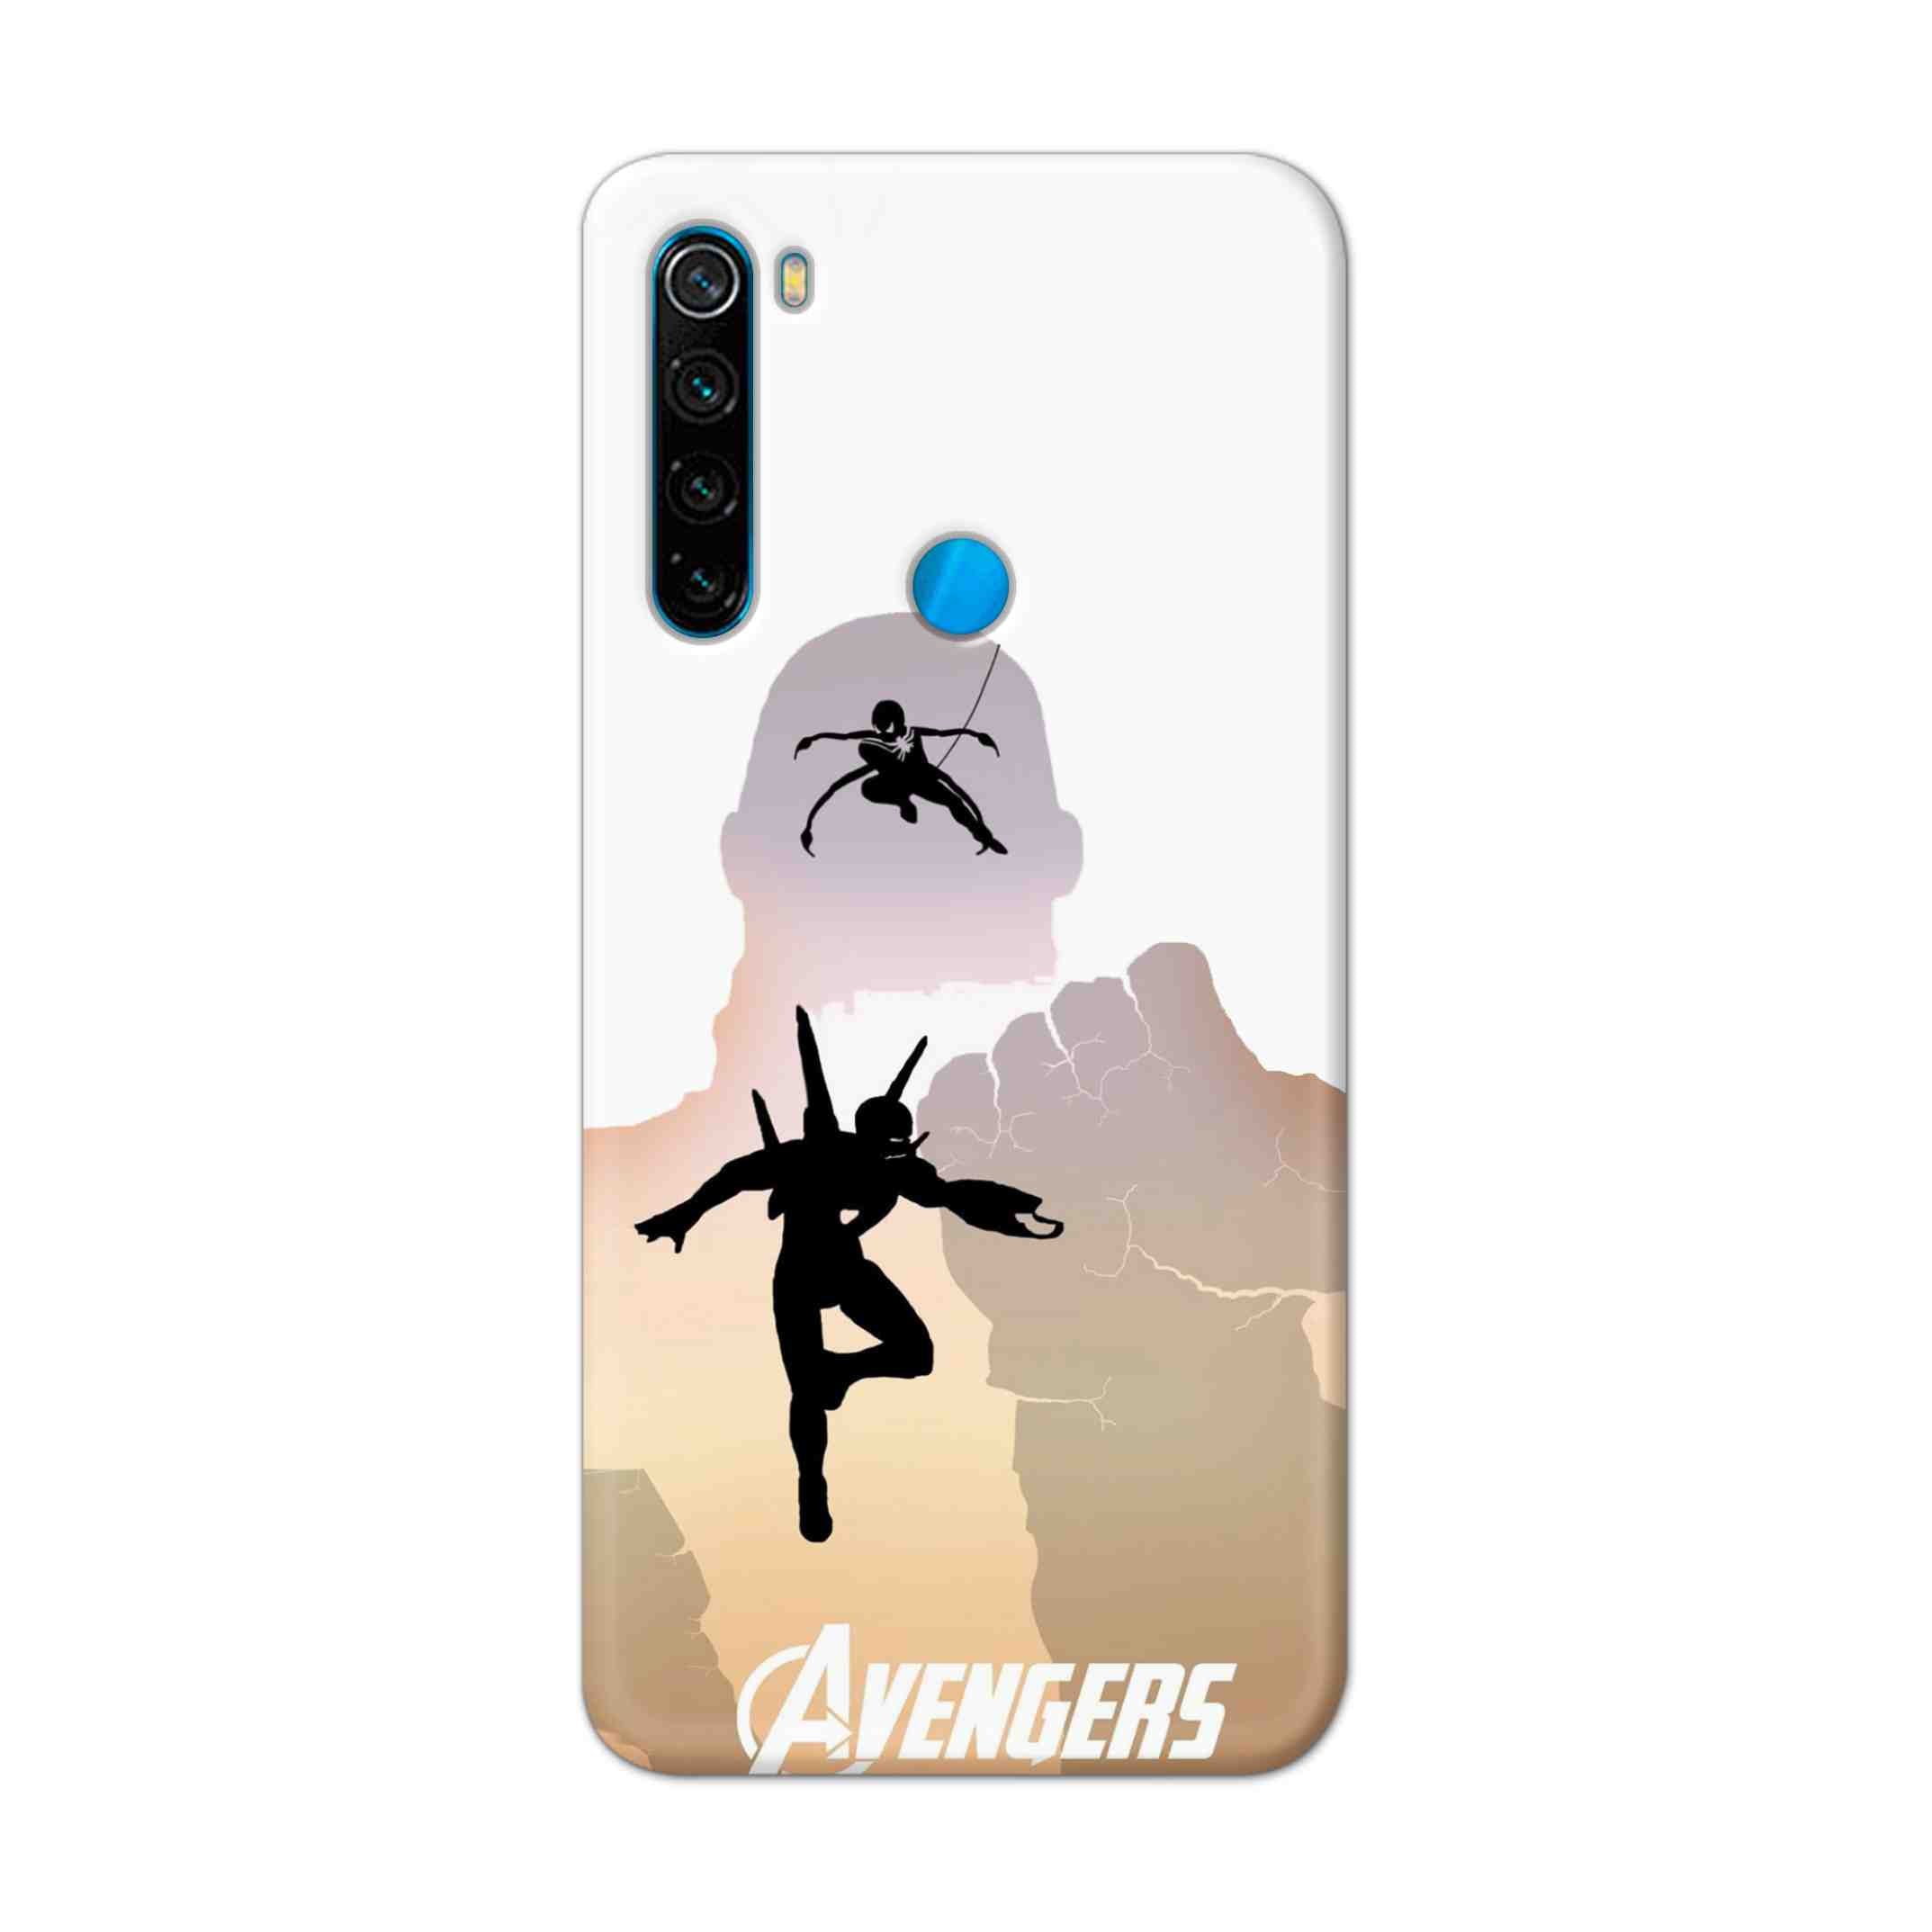 Buy Iron Man Vs Spiderman Hard Back Mobile Phone Case Cover For Xiaomi Redmi Note 8 Online